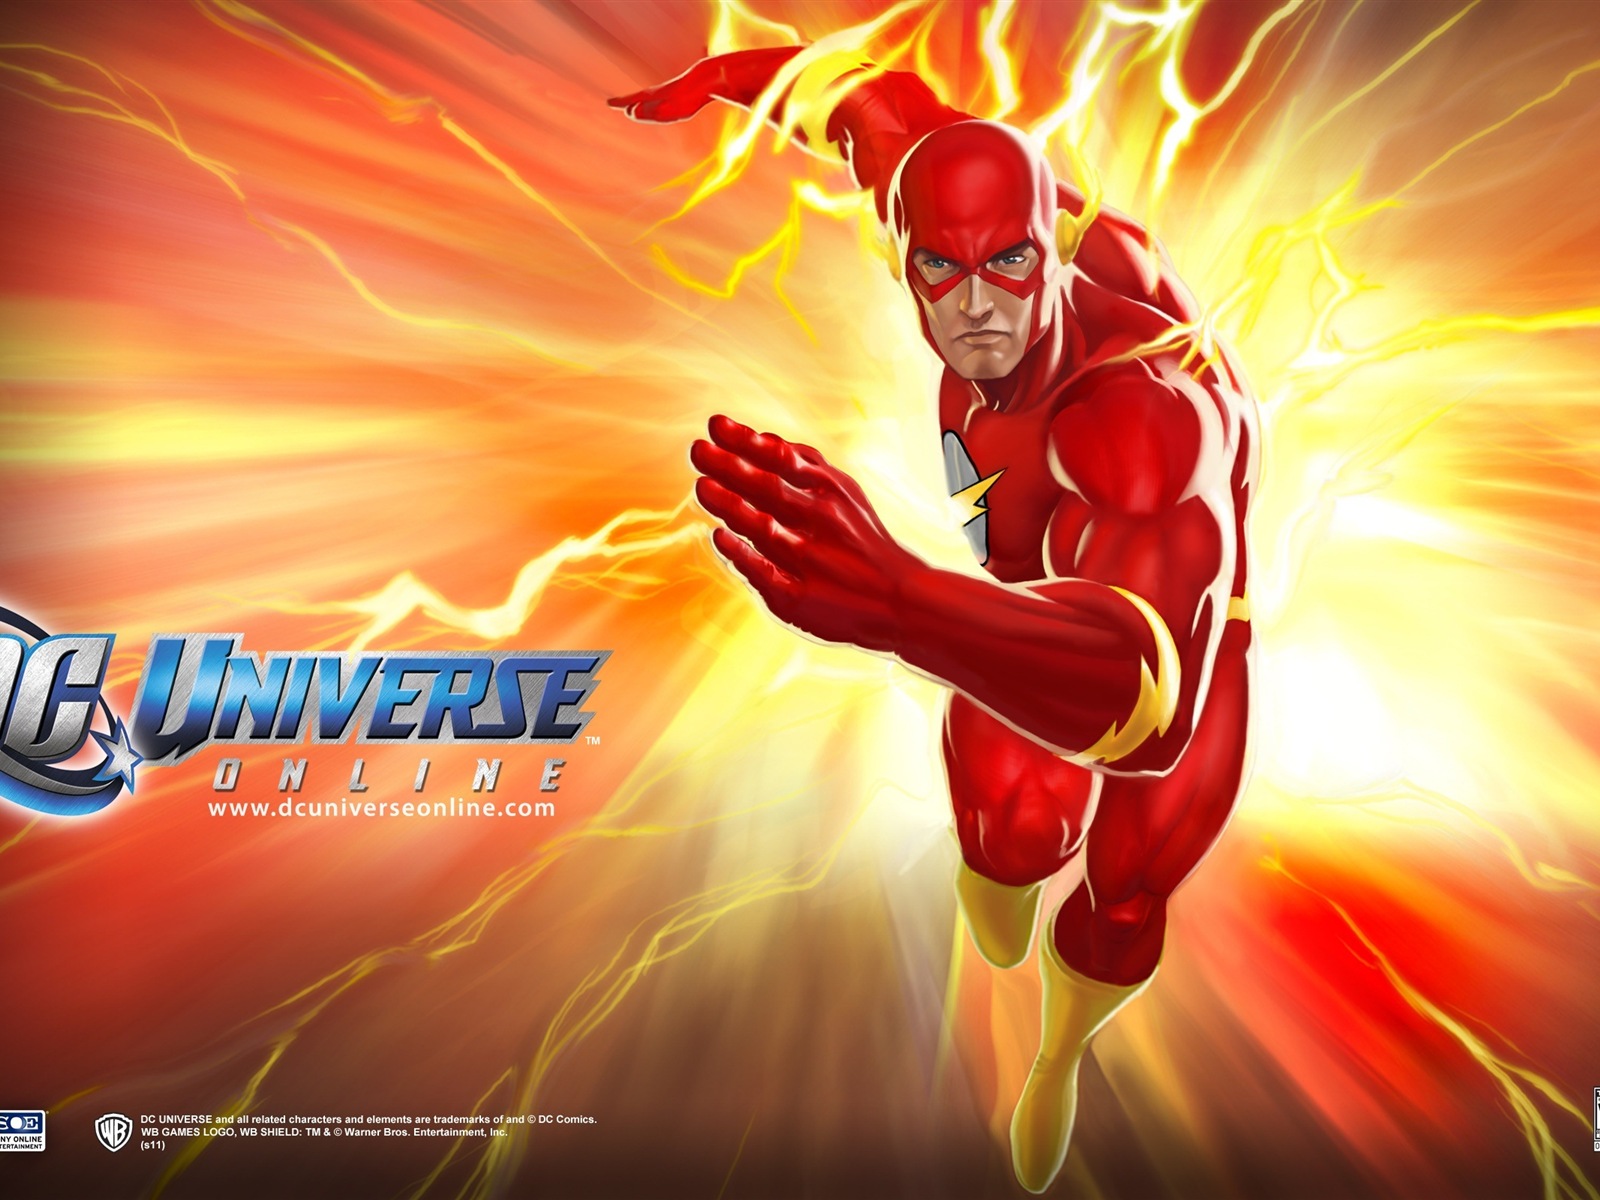 DC Universe Online HD game wallpapers #16 - 1600x1200